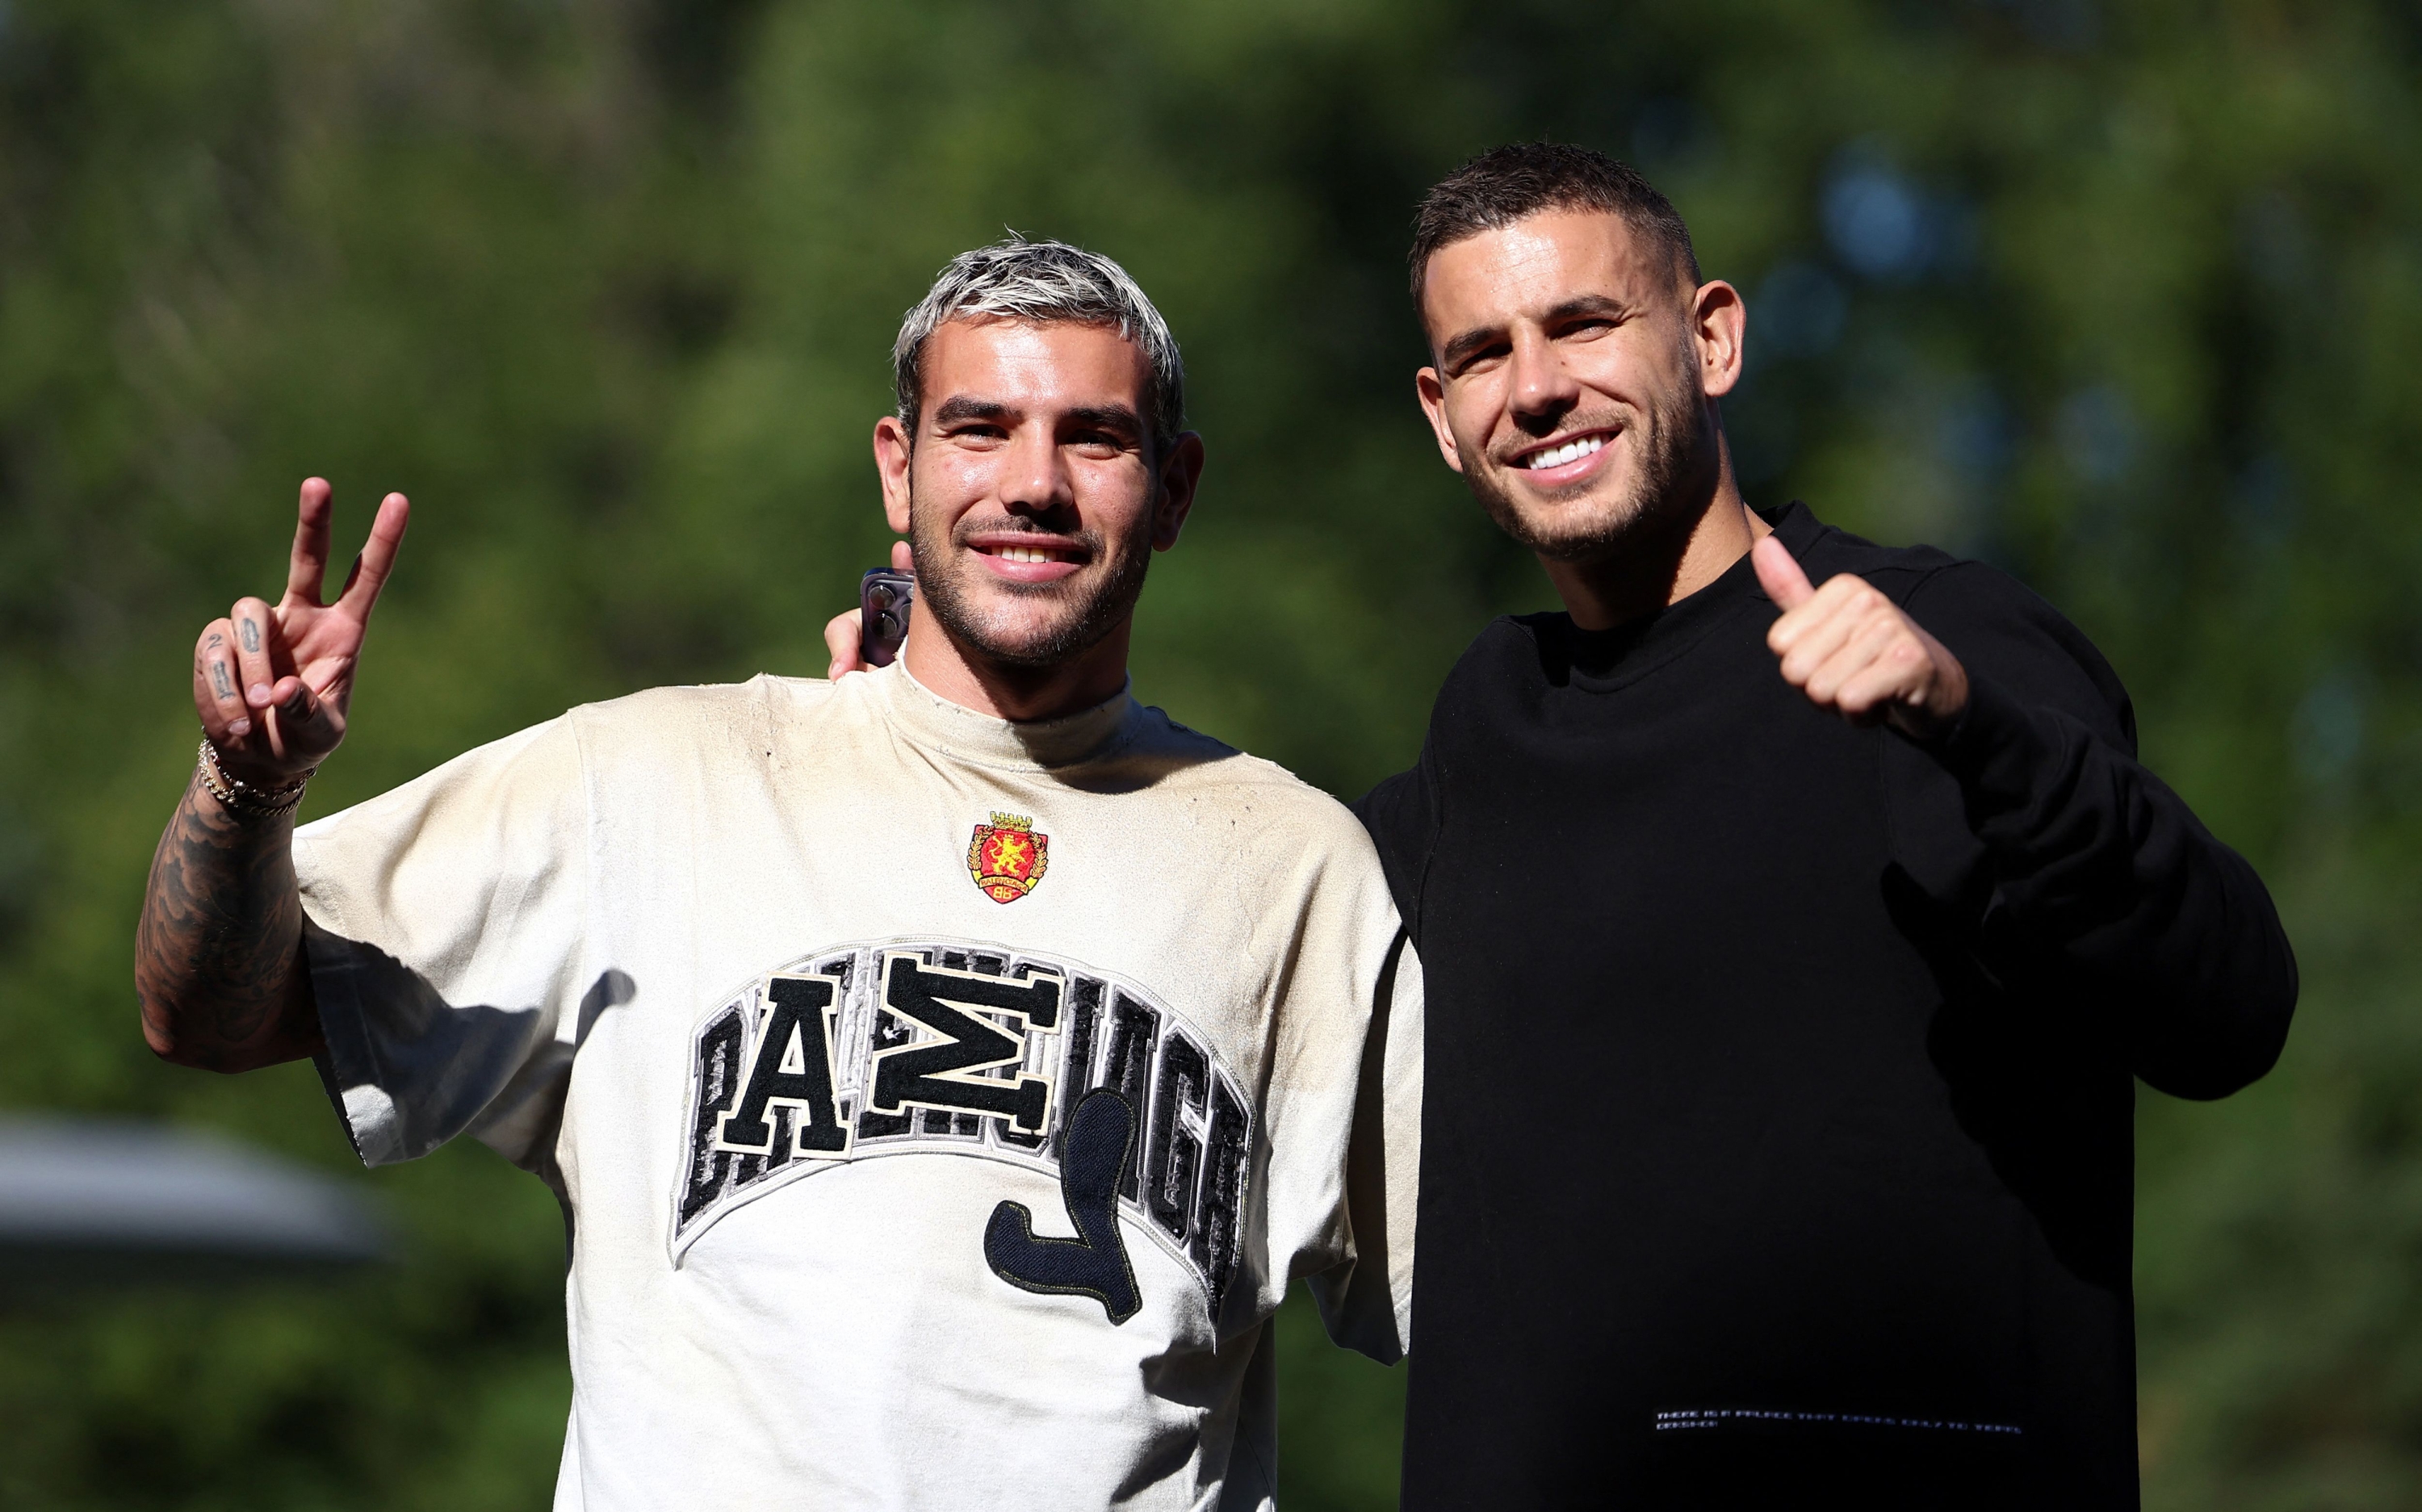 Fance's defender Theo Hernandez (L) and France's defender Lucas Hernandez give thumbs up as they arrive in Clairefontaine-en-Yvelines on September 4, 2023 as part of the team's preparation for upcoming UEFA Euro 2024 football tournament qualifying matches. France will play against Ireland on September 7, 2023, in the Group B of Euro 2024 qualifiers. (Photo by FRANCK FIFE / AFP)